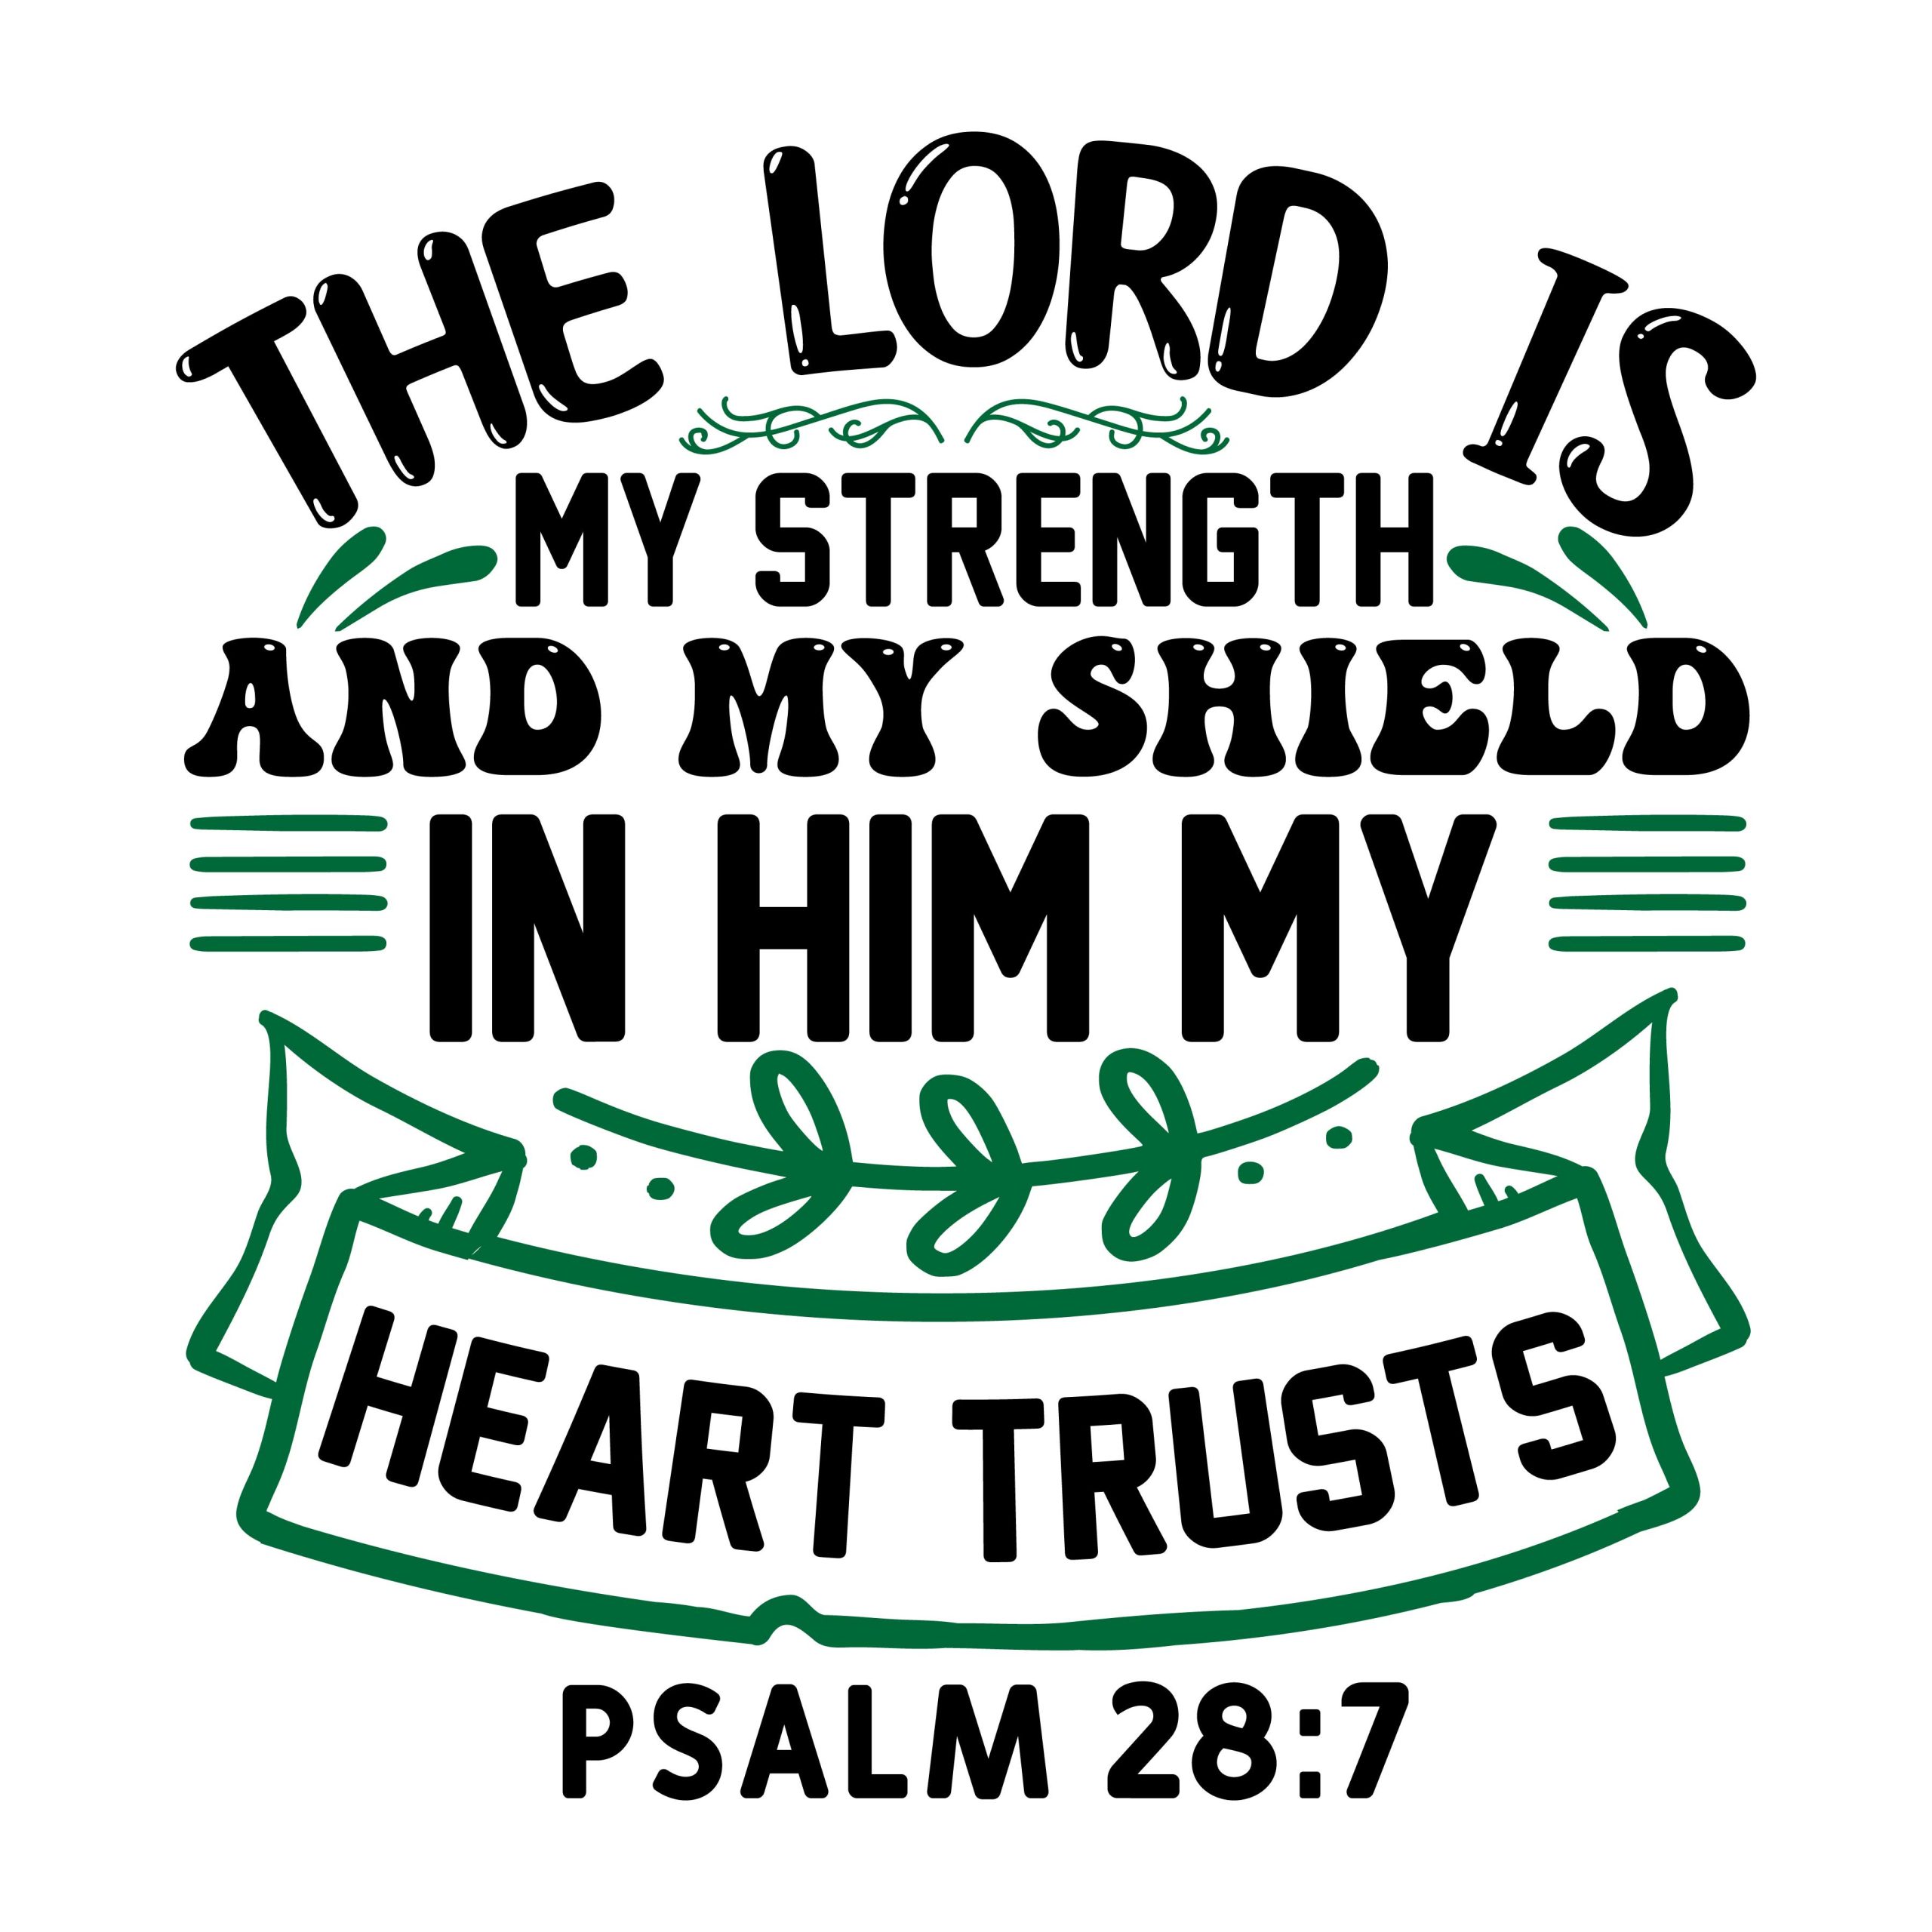 The lord is my strength and my shield in him my heart trusts psalm 28:7, bible verses, scripture verses, svg files, passages, sayings, cricut designs, silhouette, embroidery, bundle, free cut files, design space, vector